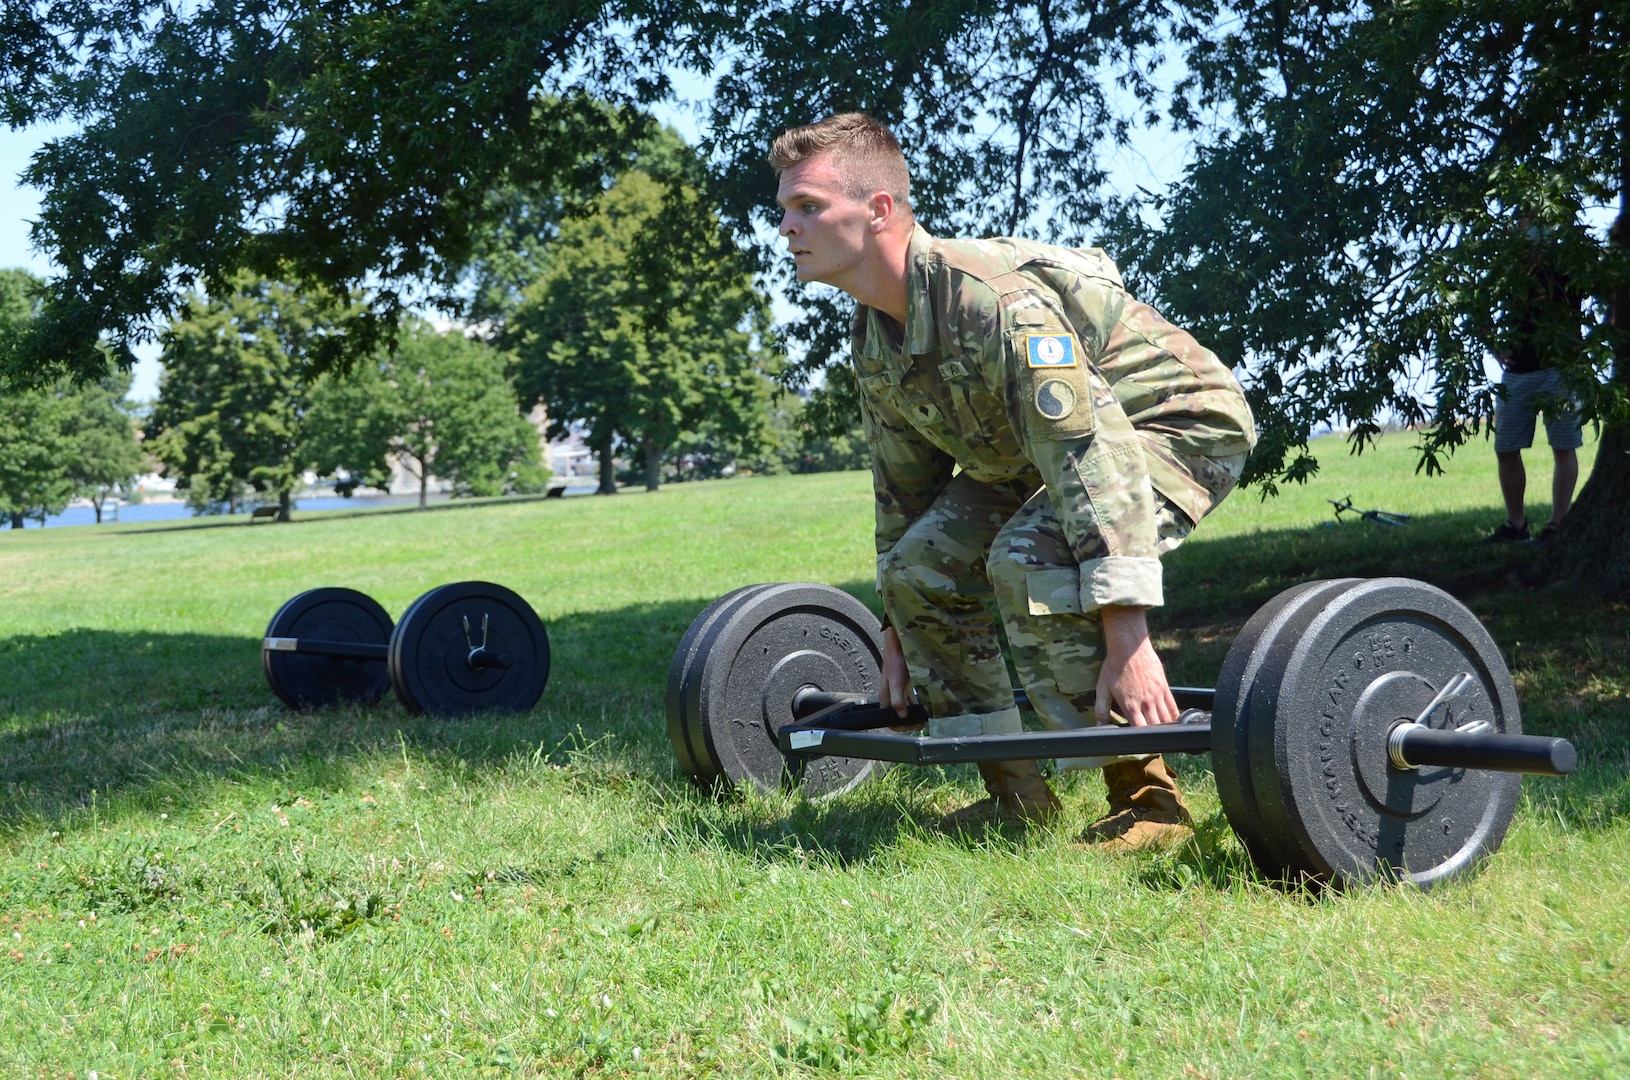 Spc. Braxton Todd, a Virginia National Guard Soldier assigned to the Fort Belvoir-based Headquarters Battalion, 29th Infantry Division, participates in high-intensity interval training during Day 2 of the 2020 Region II Best Warrior Competition, July 29, 2020, at Fort McHenry in Baltimore, Maryland. (U.S. National Guard photo by A.J. Coyne)